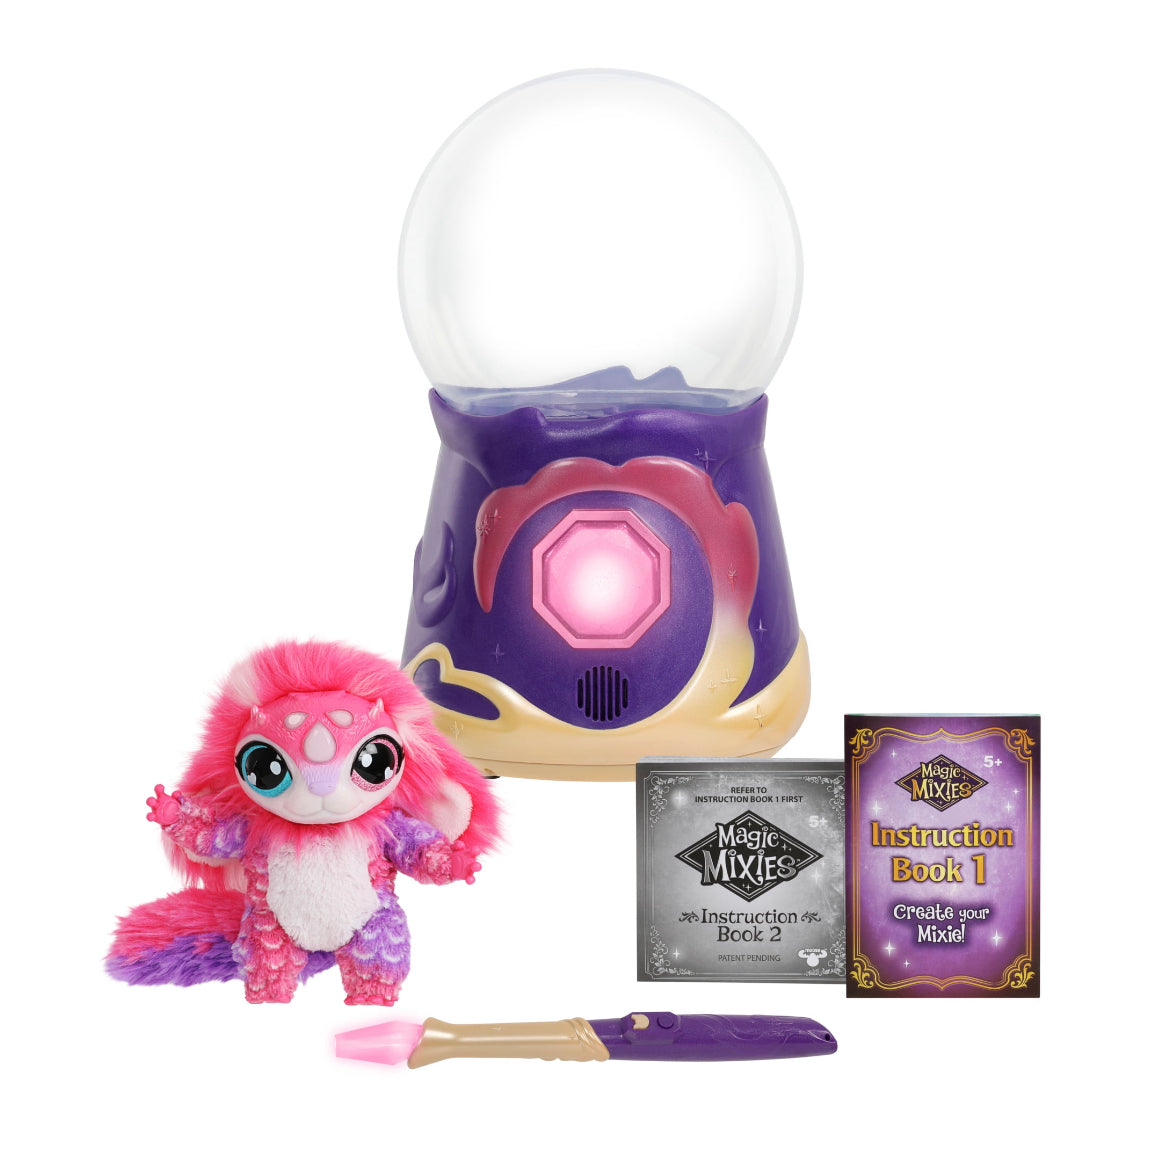 Magic Mixies Magic Genie Lamp with Interactive 8 Pink Plush Toy and 60+  Sounds & Reactions. Unlock a Magic Ring and Reveal a Pink Genie from The  Real